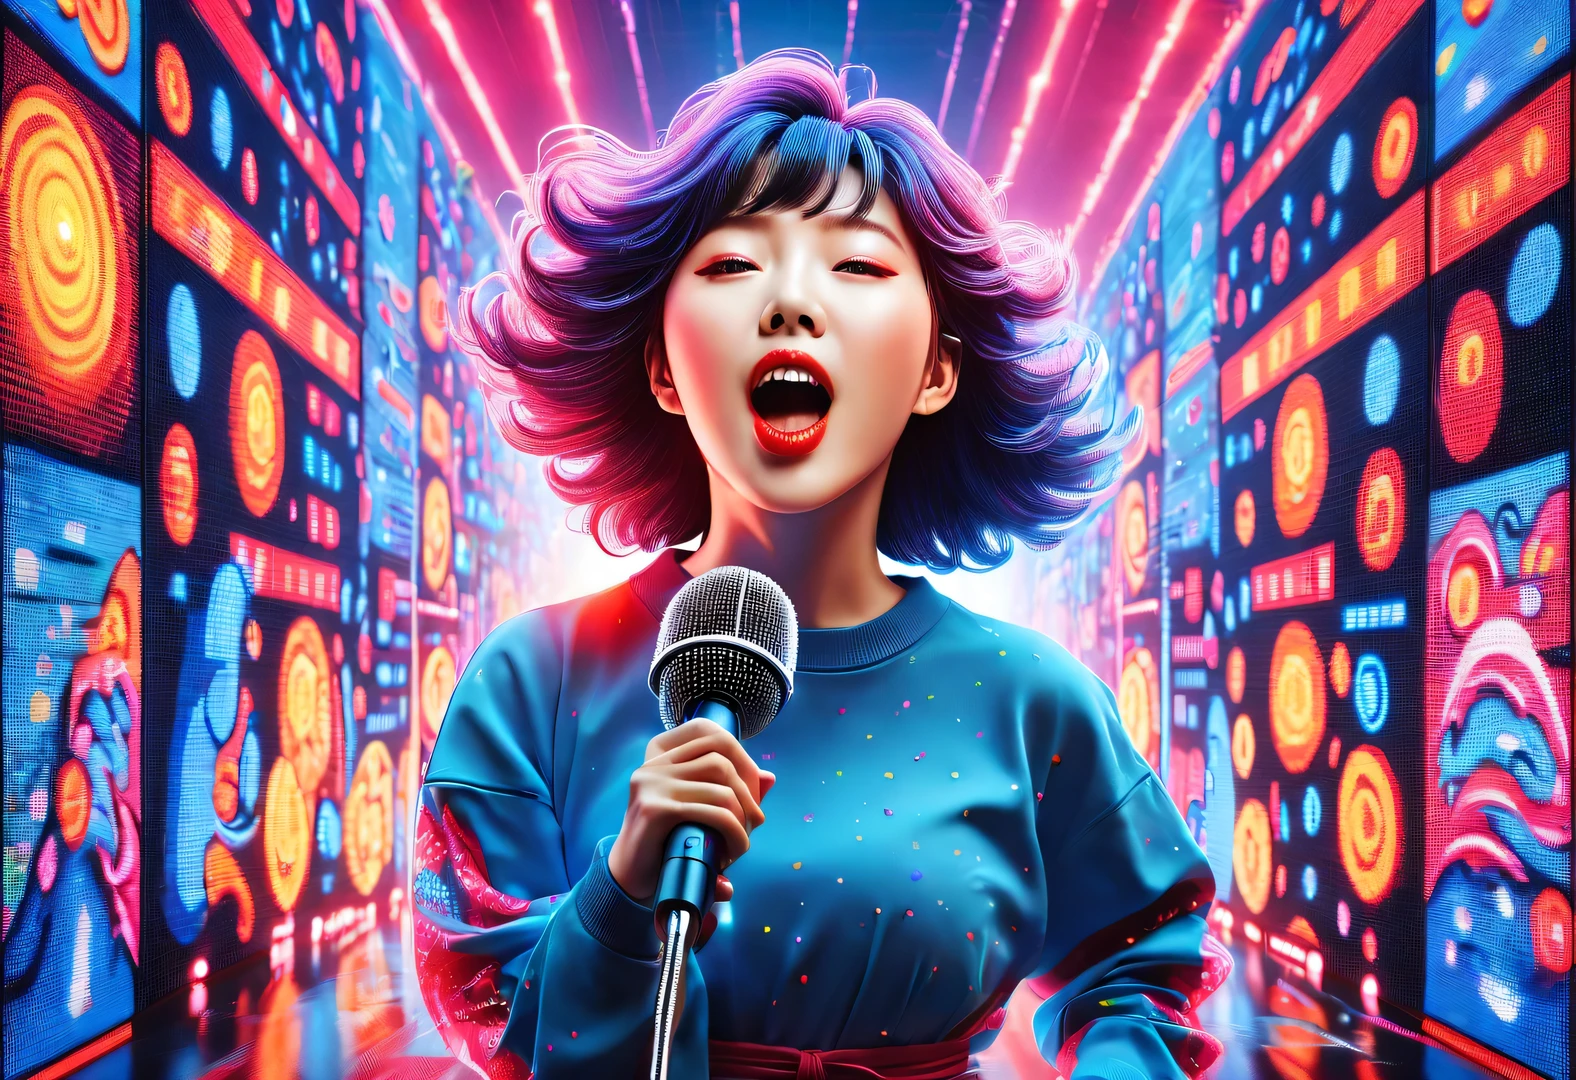 vaporwave style,Beautiful detailed,Vector illustration, Minimalism, digital illustration, Vector illustration，Minimalism，digital illustration，Hacker wearing sweatshirt and mask is working，time-shirt design，dramatic lighting，timerends at art shows
，Award-winning，icon，Highly detailed cute lively Korean actress Shim Eun-kyung holding a microphone and singing loudly with her mouth open in front of a super huge LED screen），Jumping pose，dynamic action，inspired by《strange her》，Shen Eun-kyung combed her hair into a slightly curly baby style，Very fair skin，timehere are two charming dimples on both cheeks，Wearing a red embroidered lace dress，background：LED screen, dramatic lighting, time

